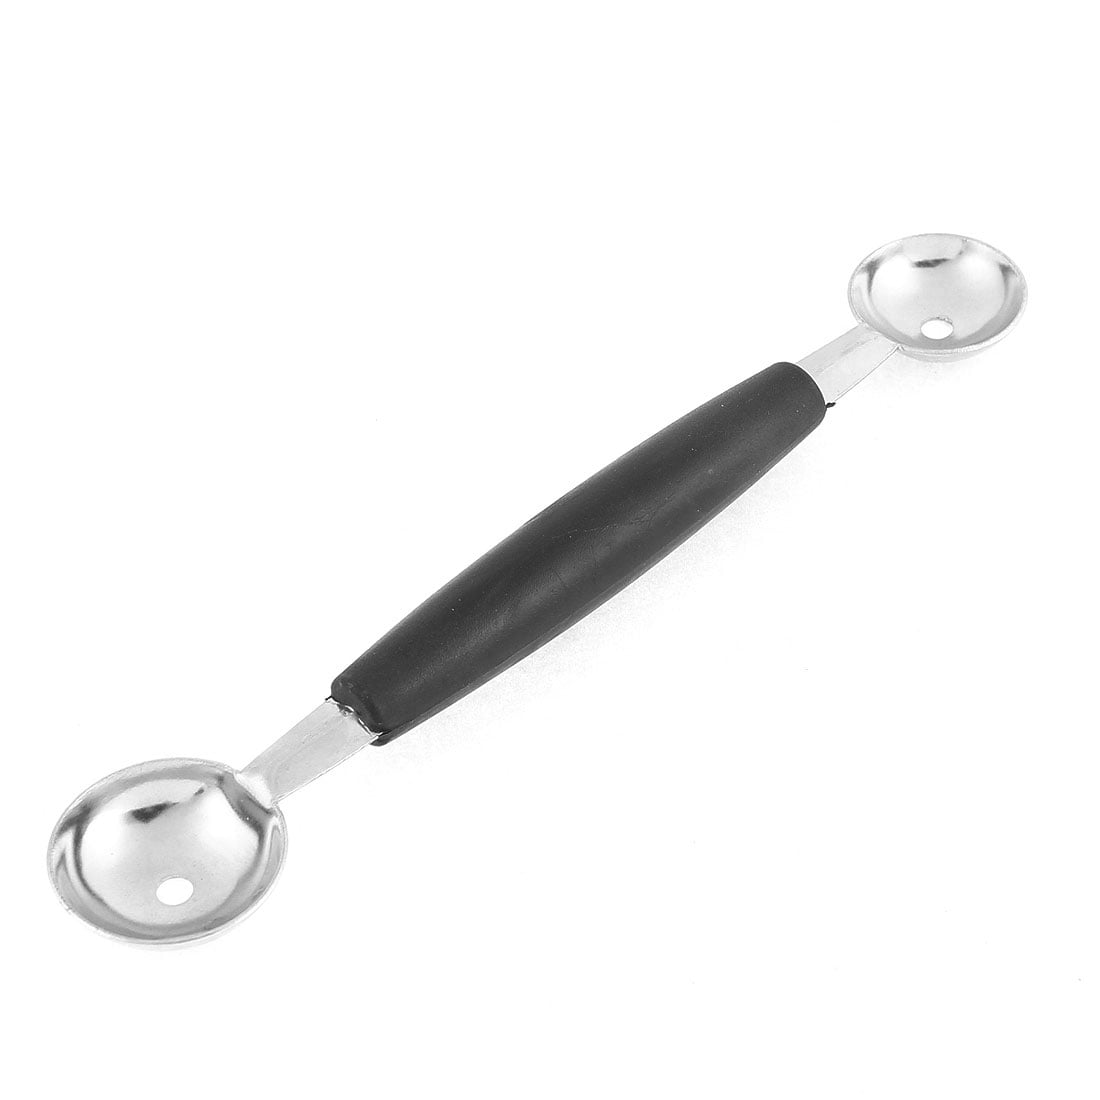 https://ak1.ostkcdn.com/images/products/is/images/direct/22ab7f8fa8e398267fd8dc63338f968eaa1b9a9a/Unique-Bargains-Home-Kitchen-Stainless-Steel-Fruit-Melon-Tool-Baller-Double-end-Spoon-Scoop.jpg